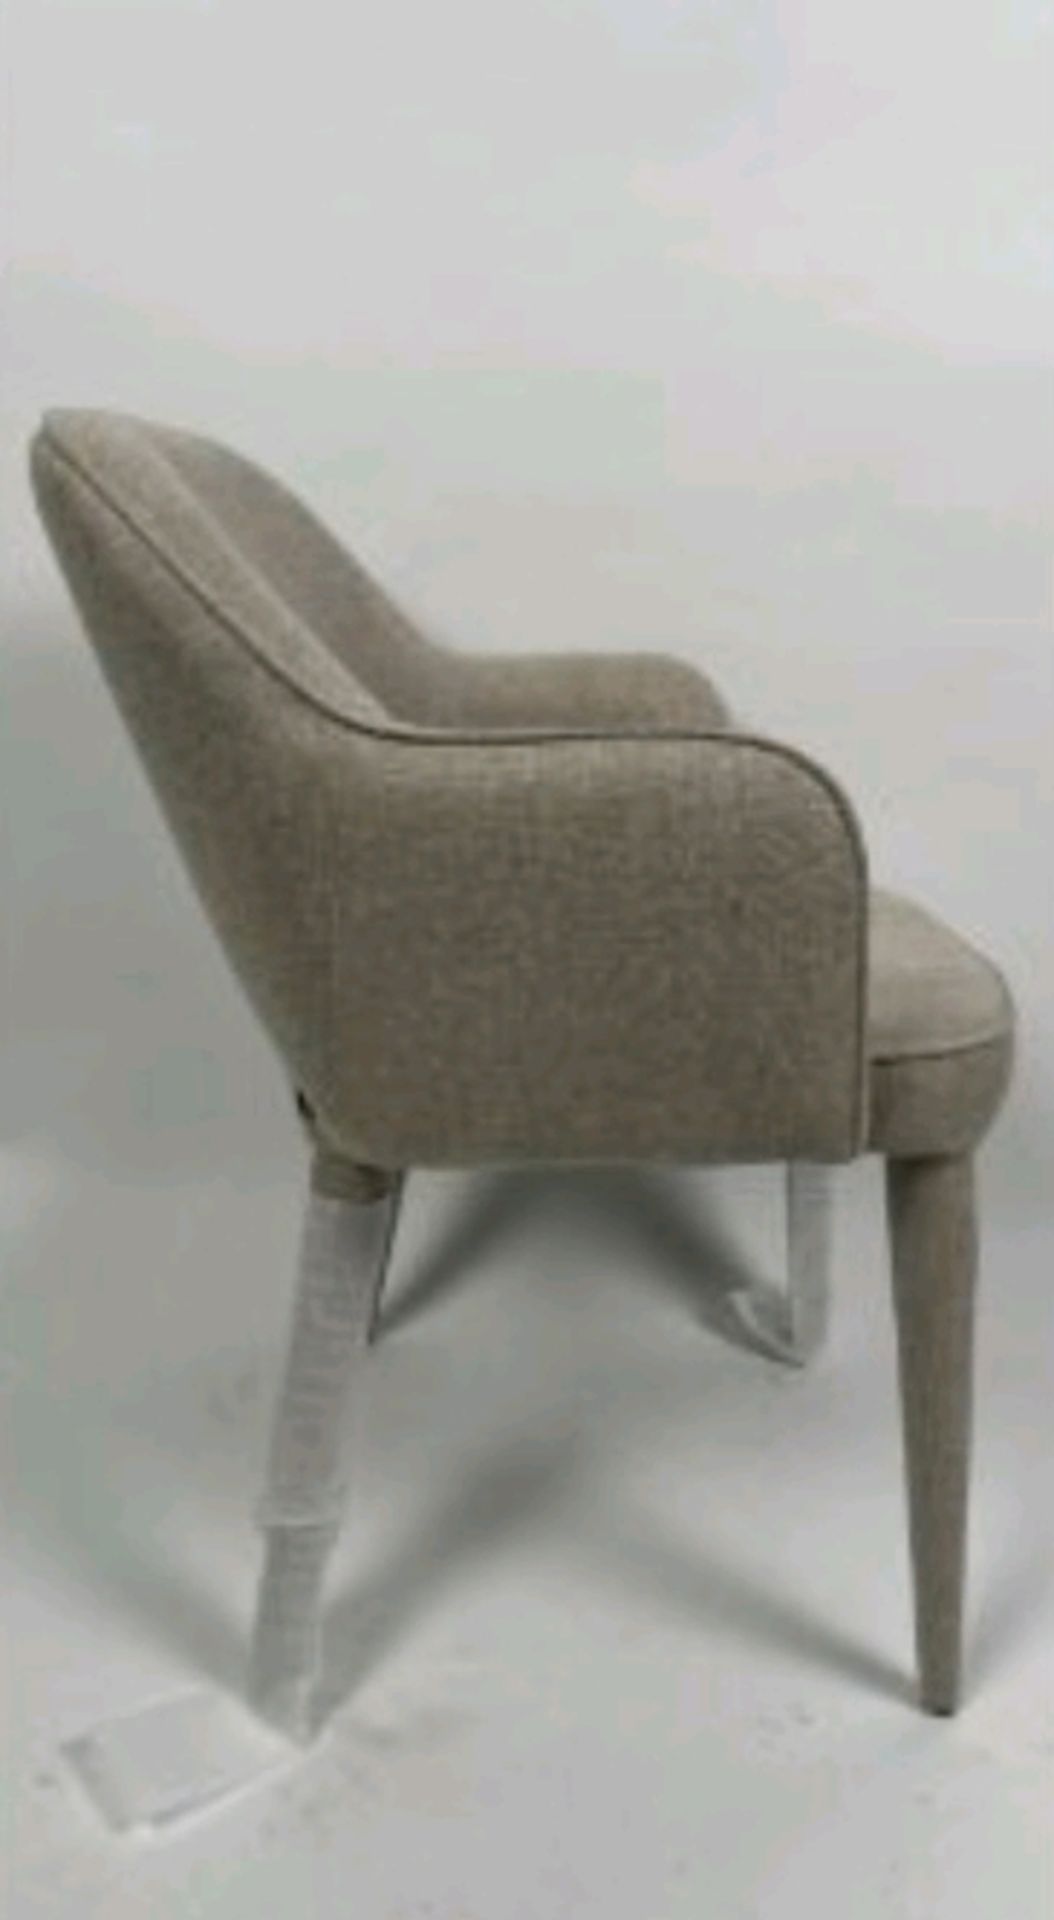 Pols Potten Holy Padded Armchair Ecru - Image 2 of 4